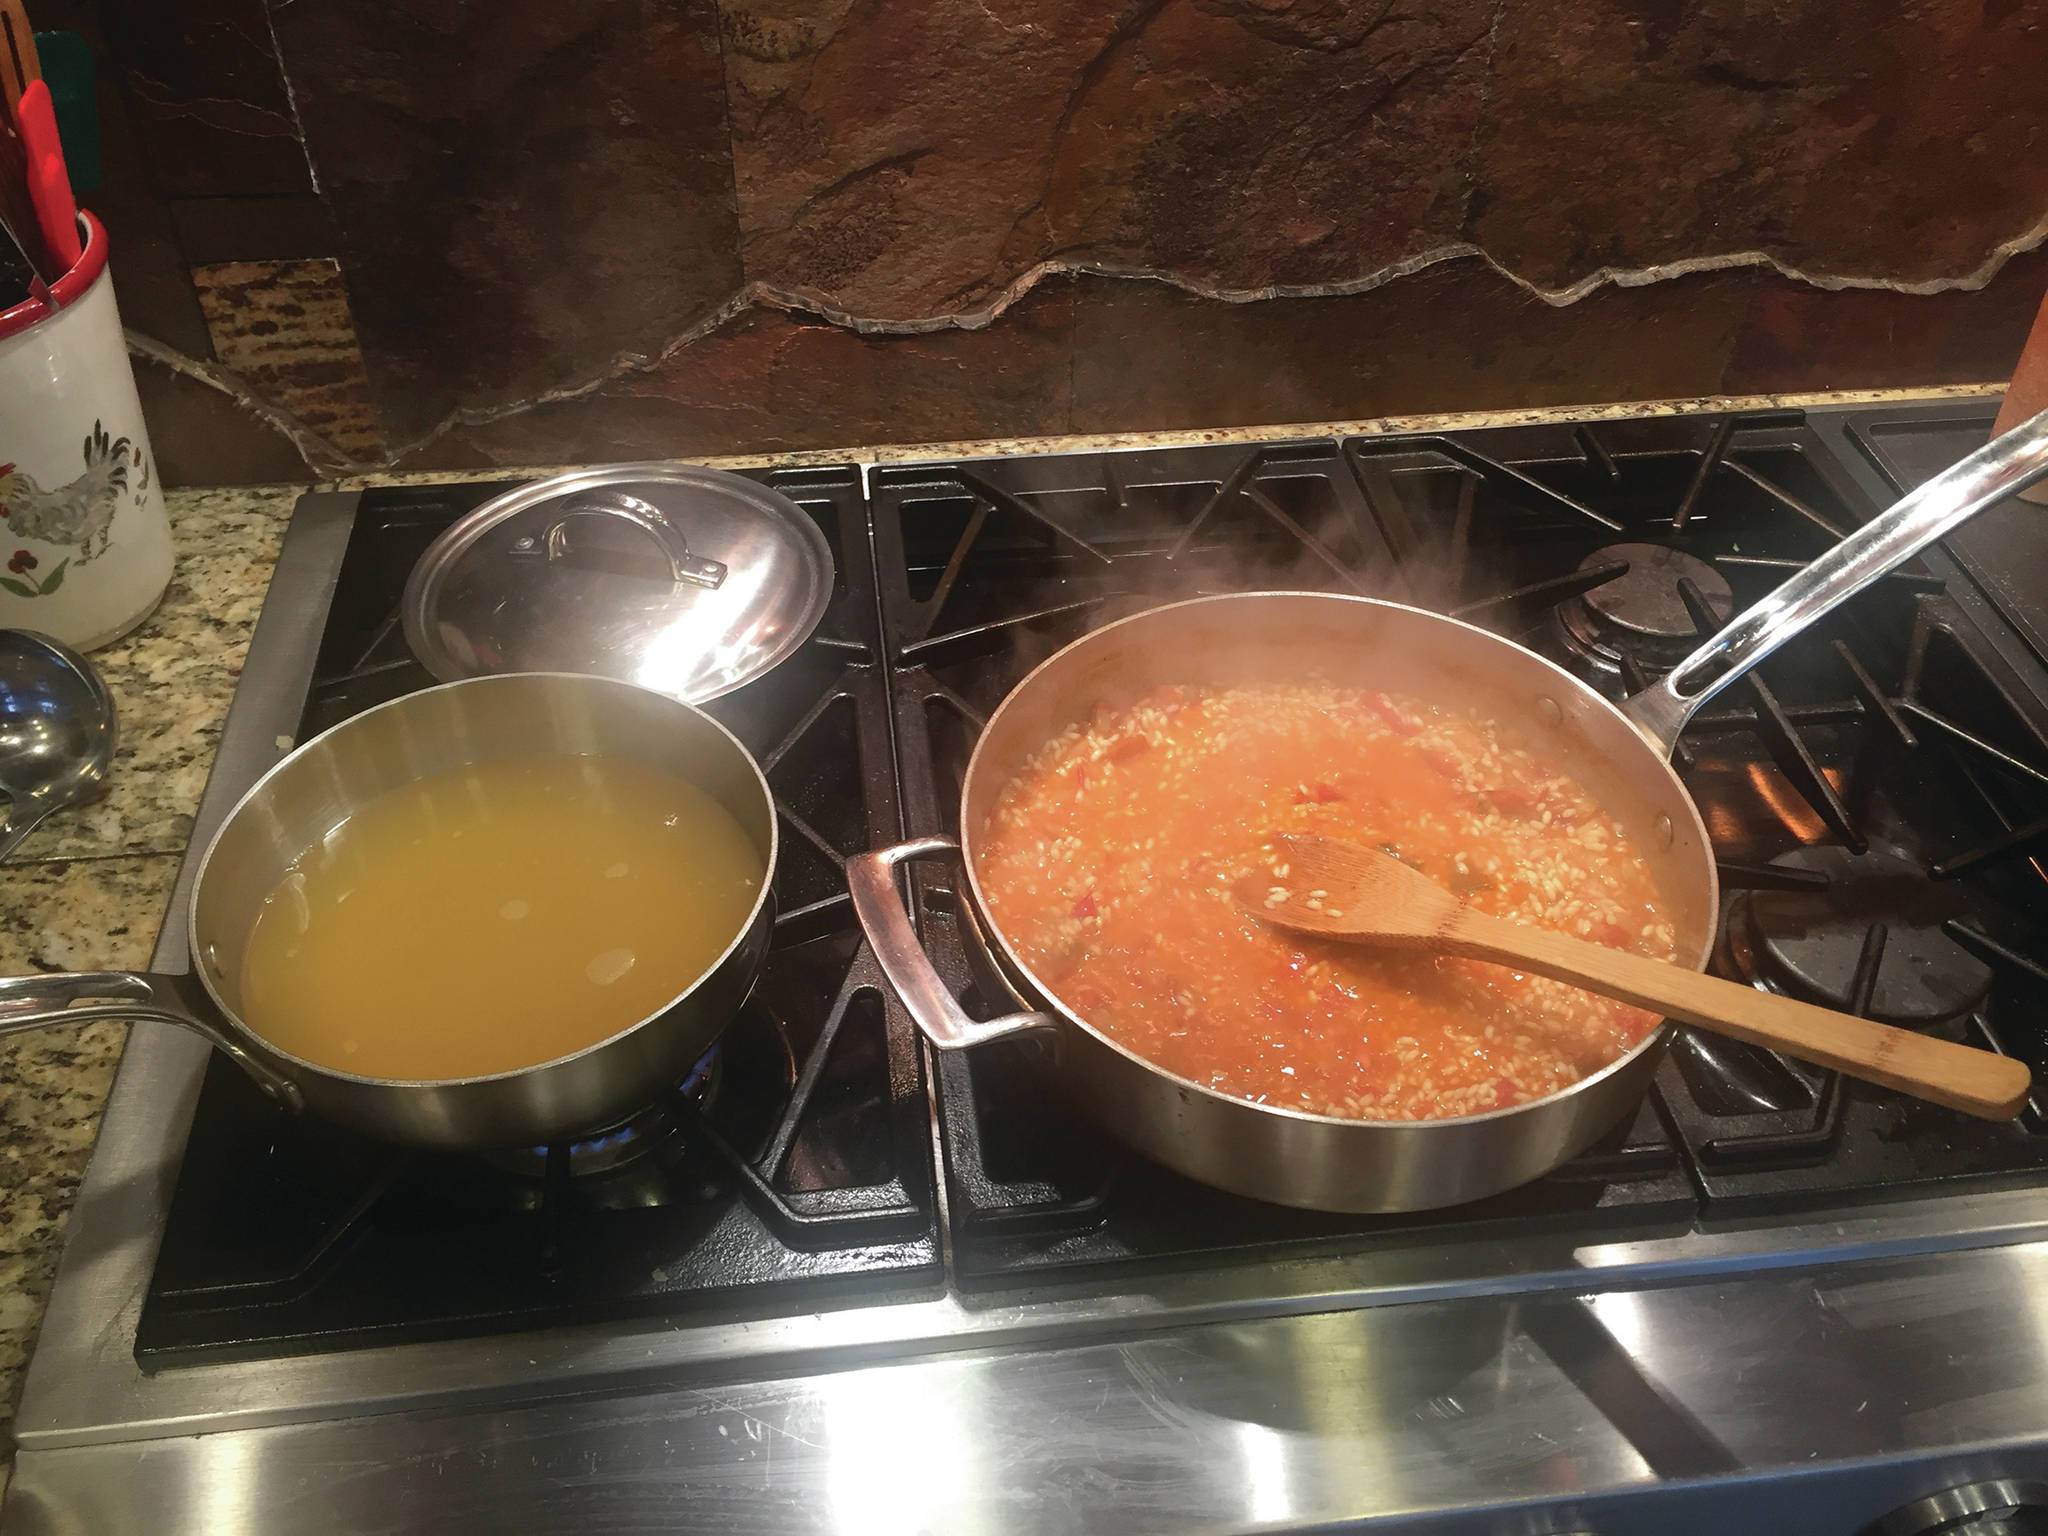 Tomato Risotto takes time to make, but the preparation can be therapeutic, as seen here in Teri Robl’s kitchen in this photo taken on Sept. 17, 2019, in Homer, Alaska. (Photo by Teri Robl)